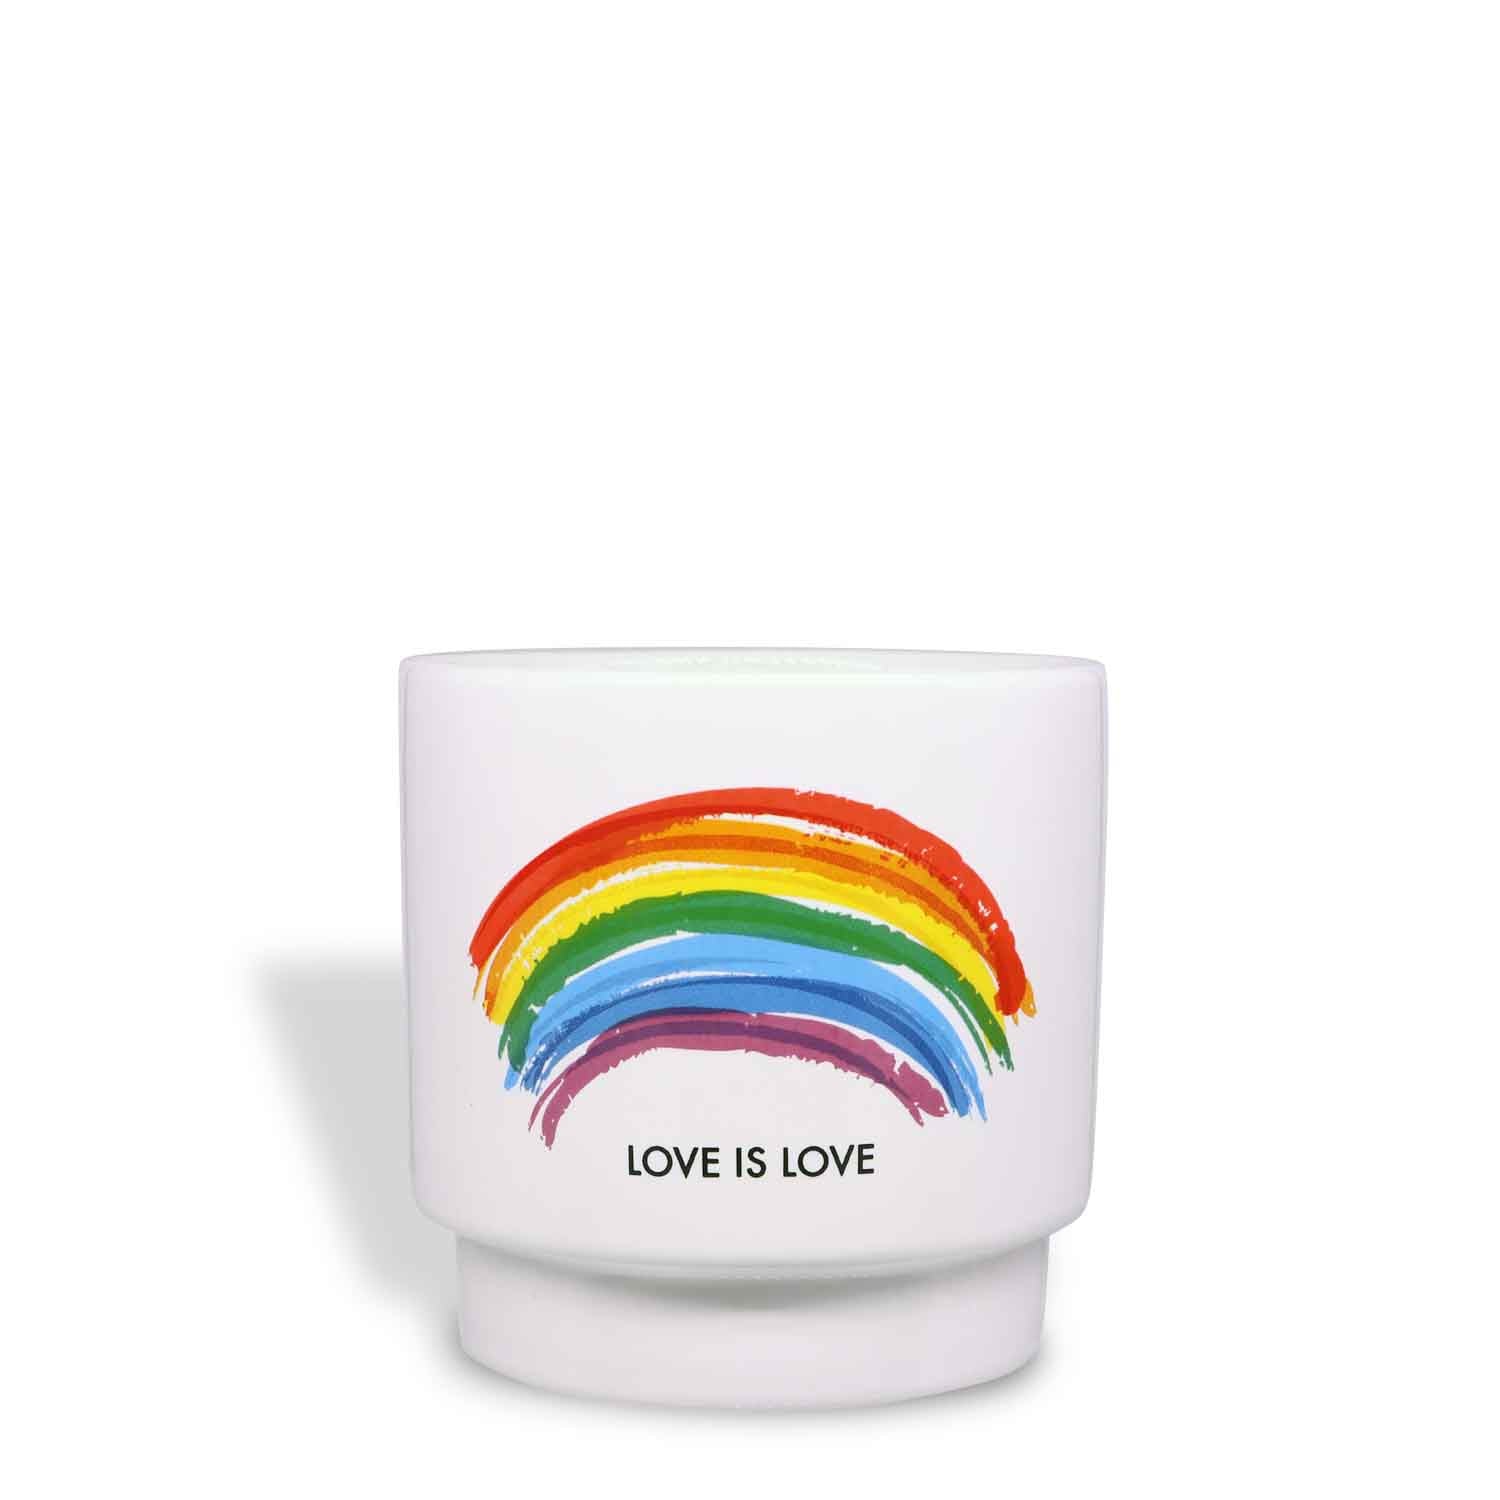 A Love is Love Scented Ceramic Candle (10 oz) from the Pride Collection with the words love is love on it.